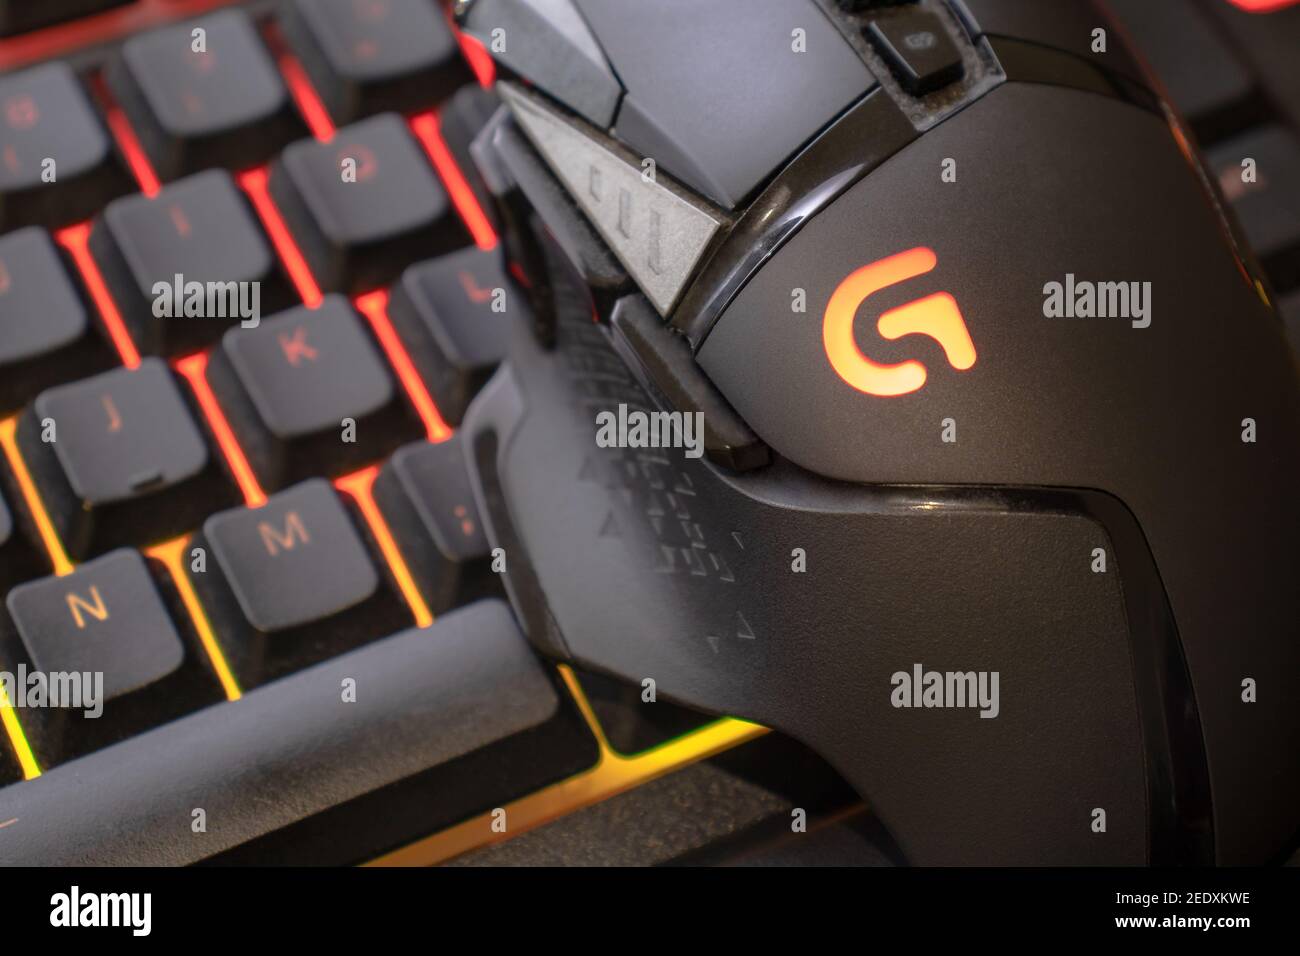 Logitech g502 hero gaming mouse on red illuminated gaming keyboard, close  up shot. devices to play on pc. Verona, 08-02-21 Stock Photo - Alamy